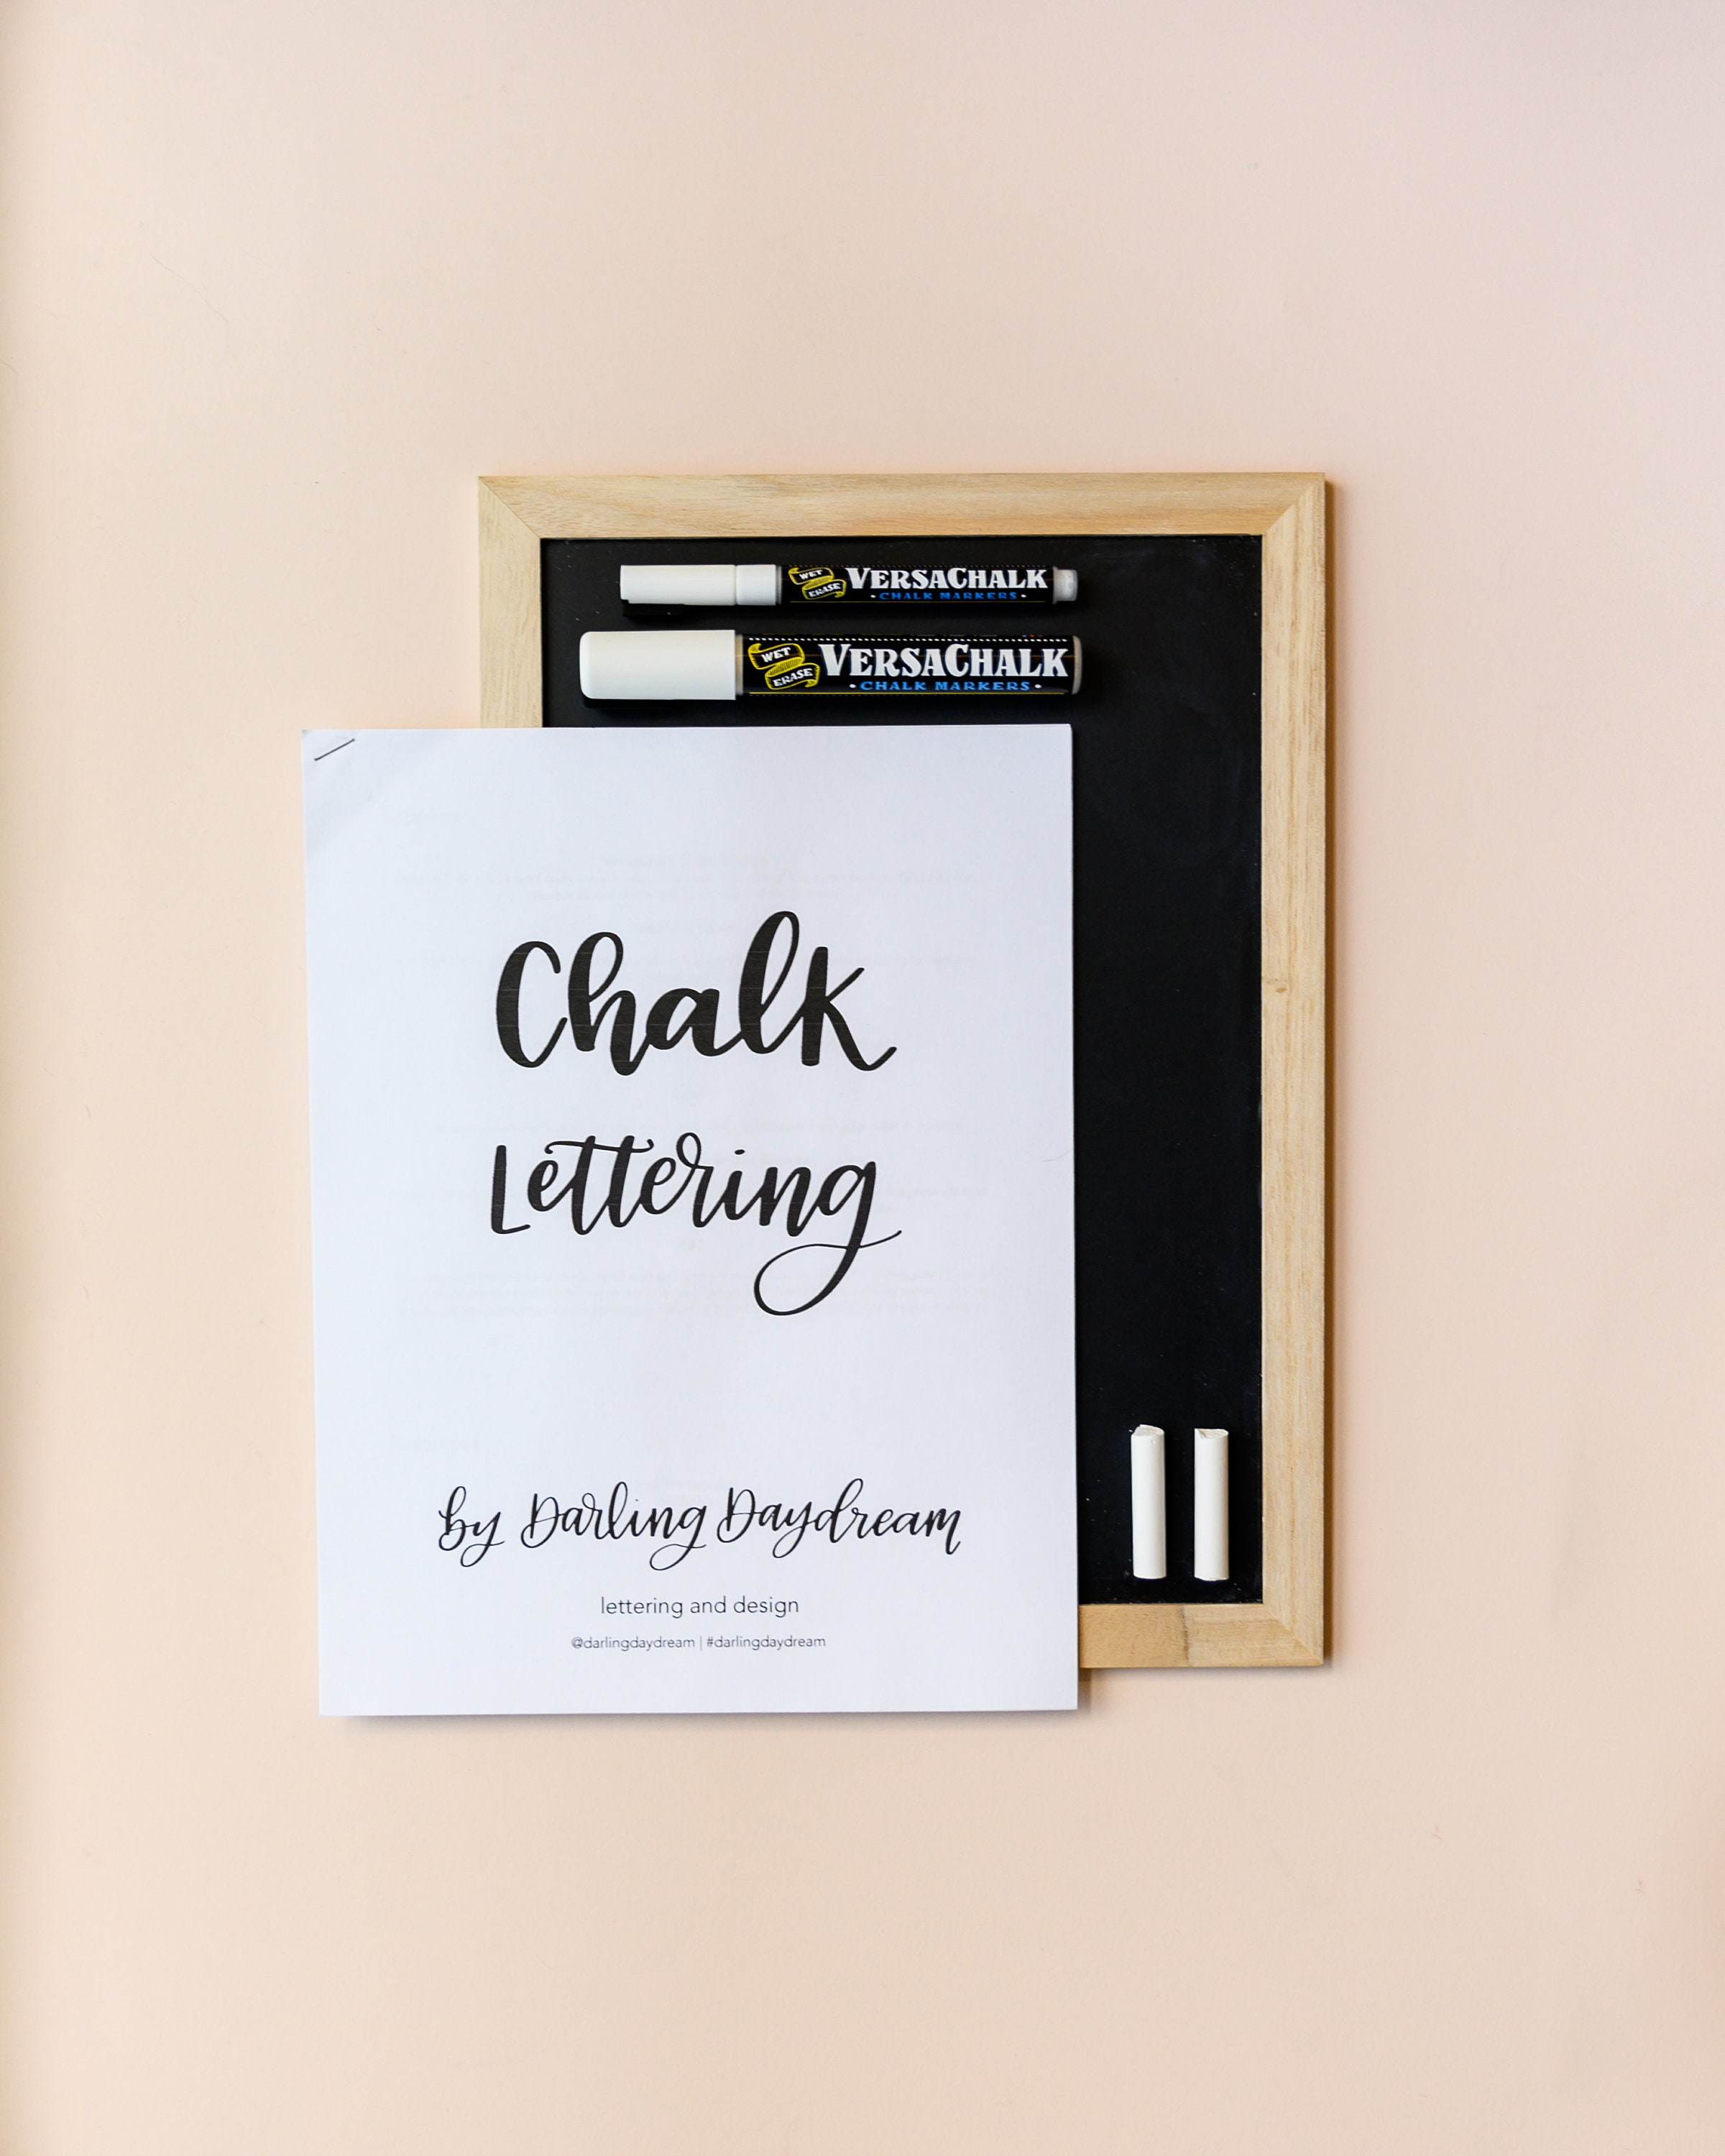 Cohas Chalkflex Adhesive Backed Chalkboard Material Includes